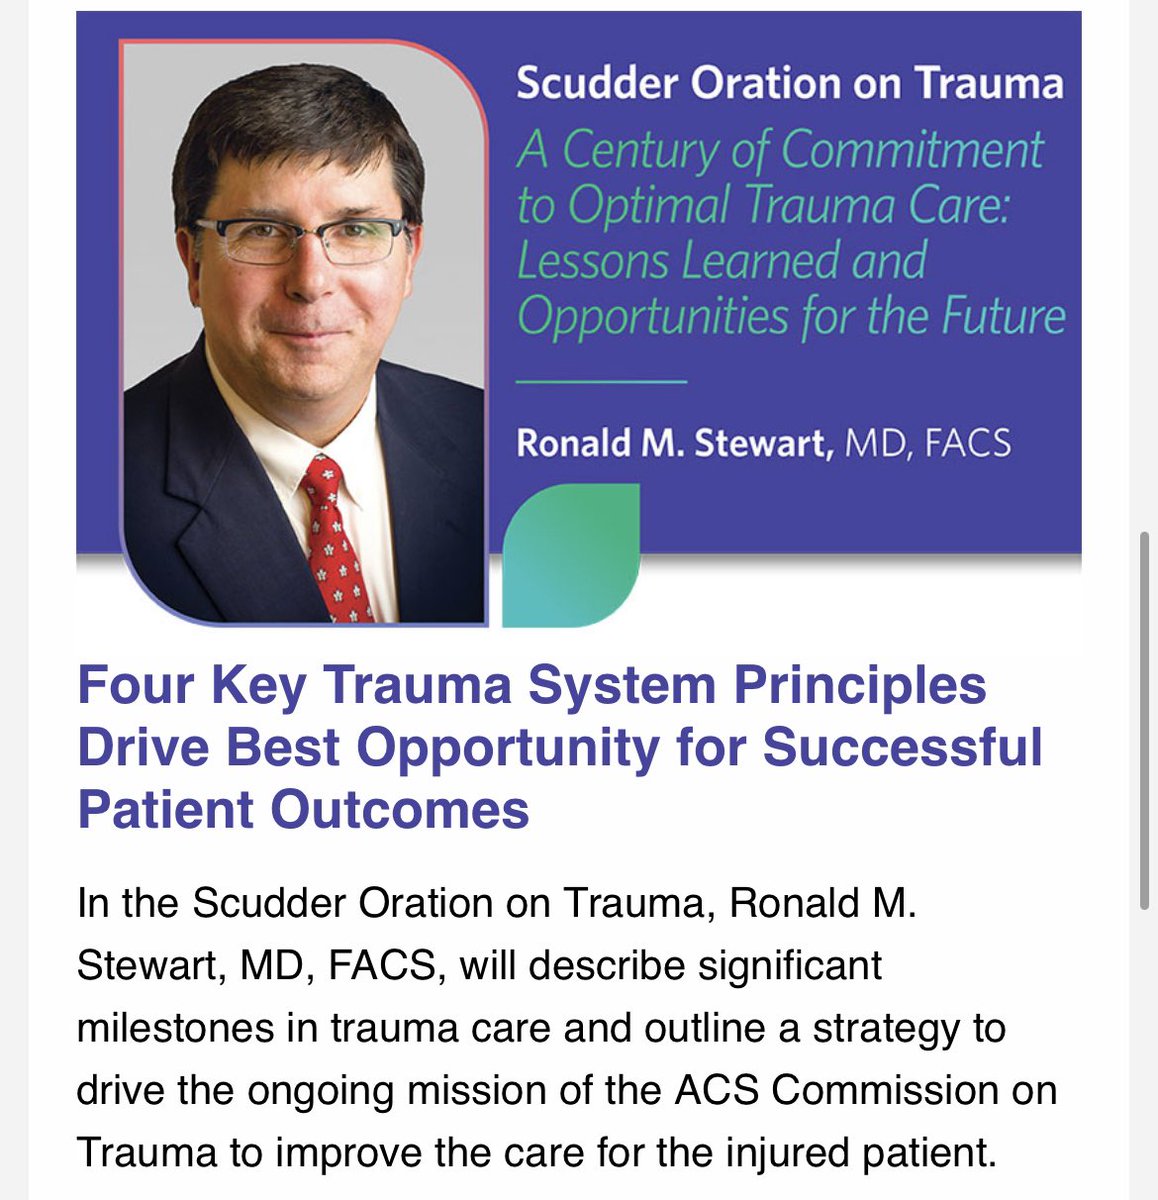 Congratulations to @Stewartr84 for being selected to give the Scudder Oration at #ACSCC22 We look forward to his talk today and are thankful for his leadership!